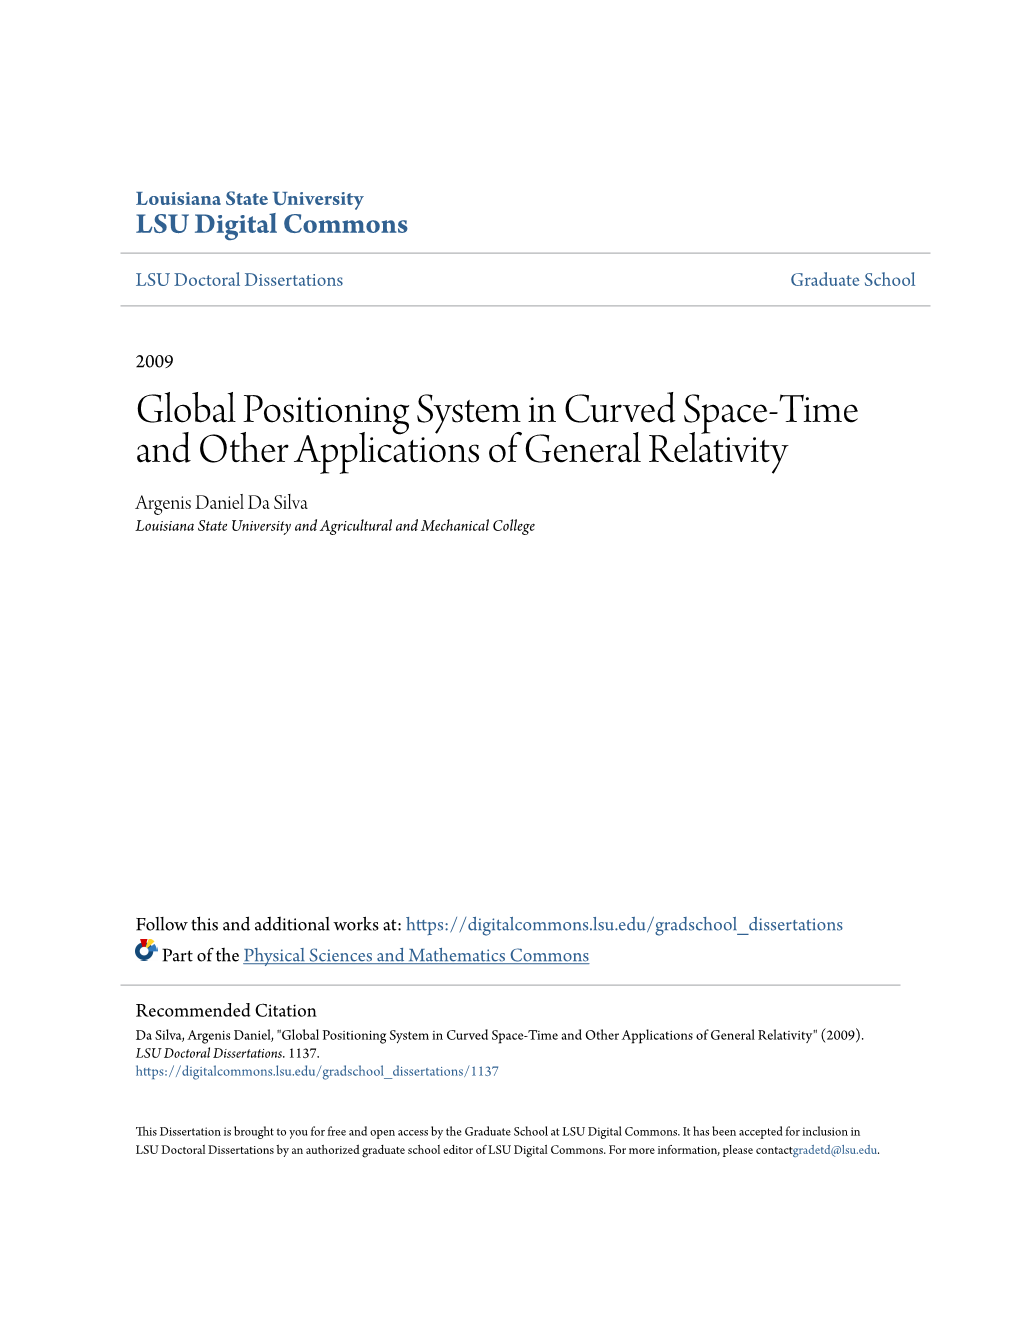 Global Positioning System in Curved Space-Time and Other Applications